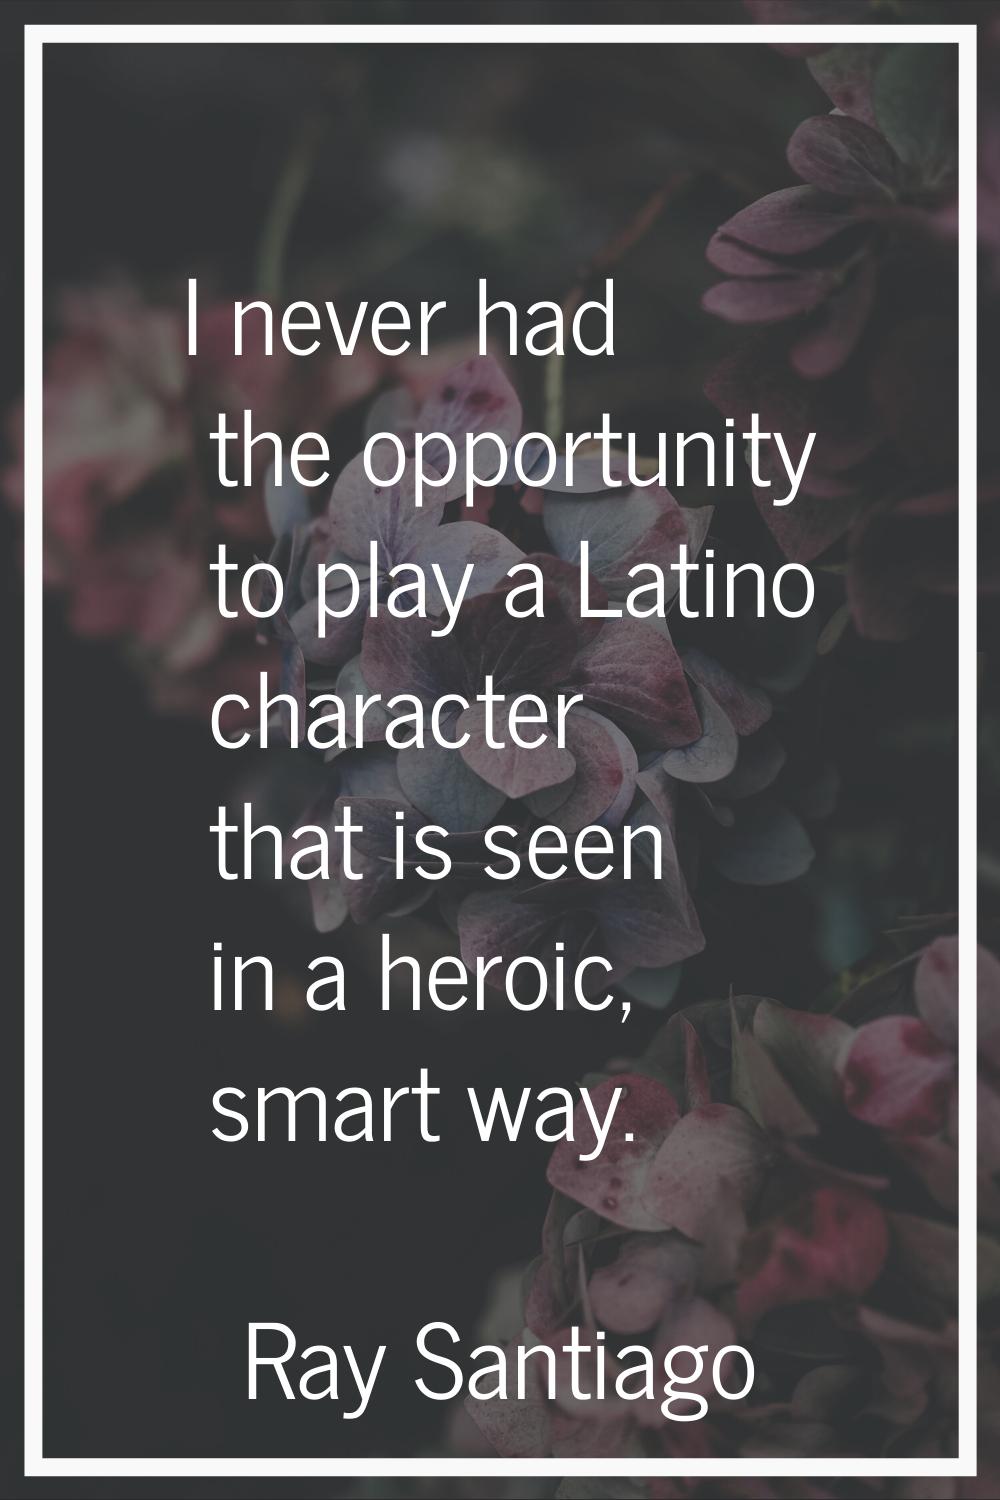 I never had the opportunity to play a Latino character that is seen in a heroic, smart way.